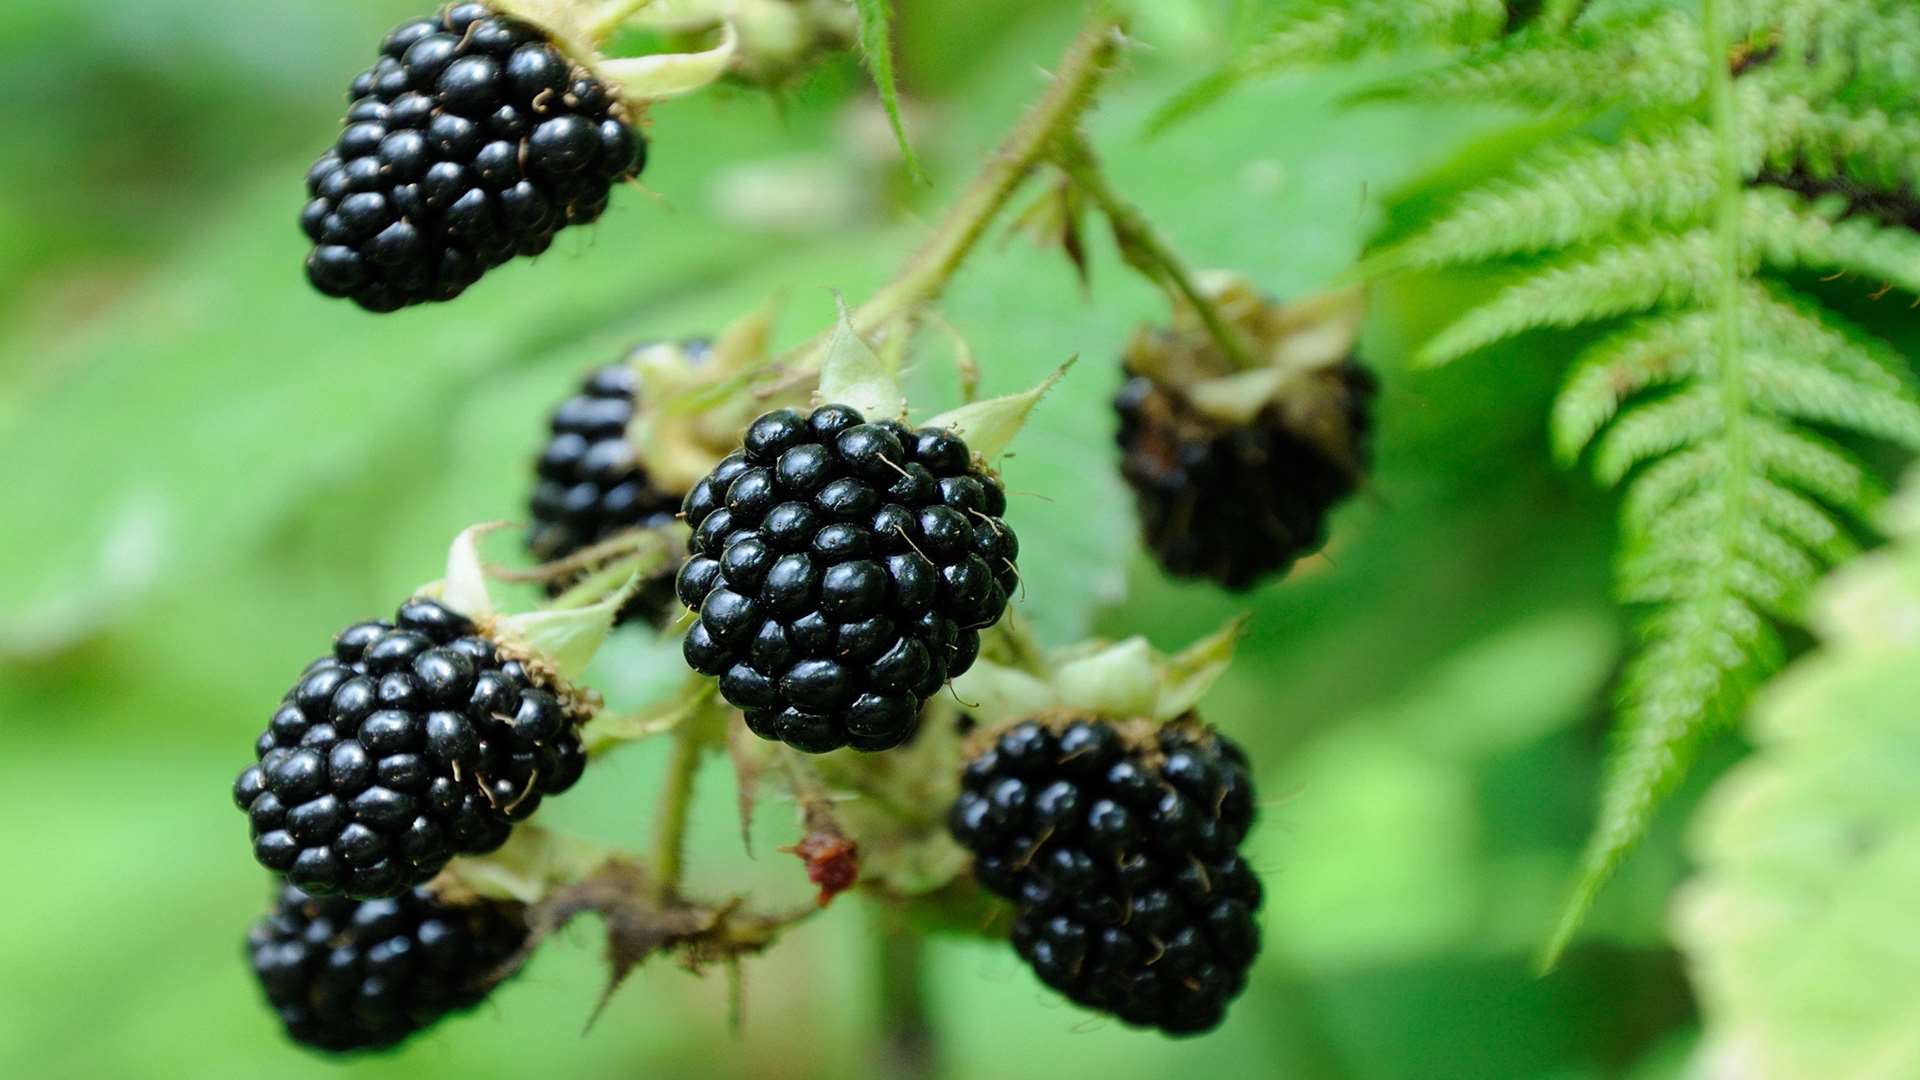 Head out into the hedgerows for some blackberries